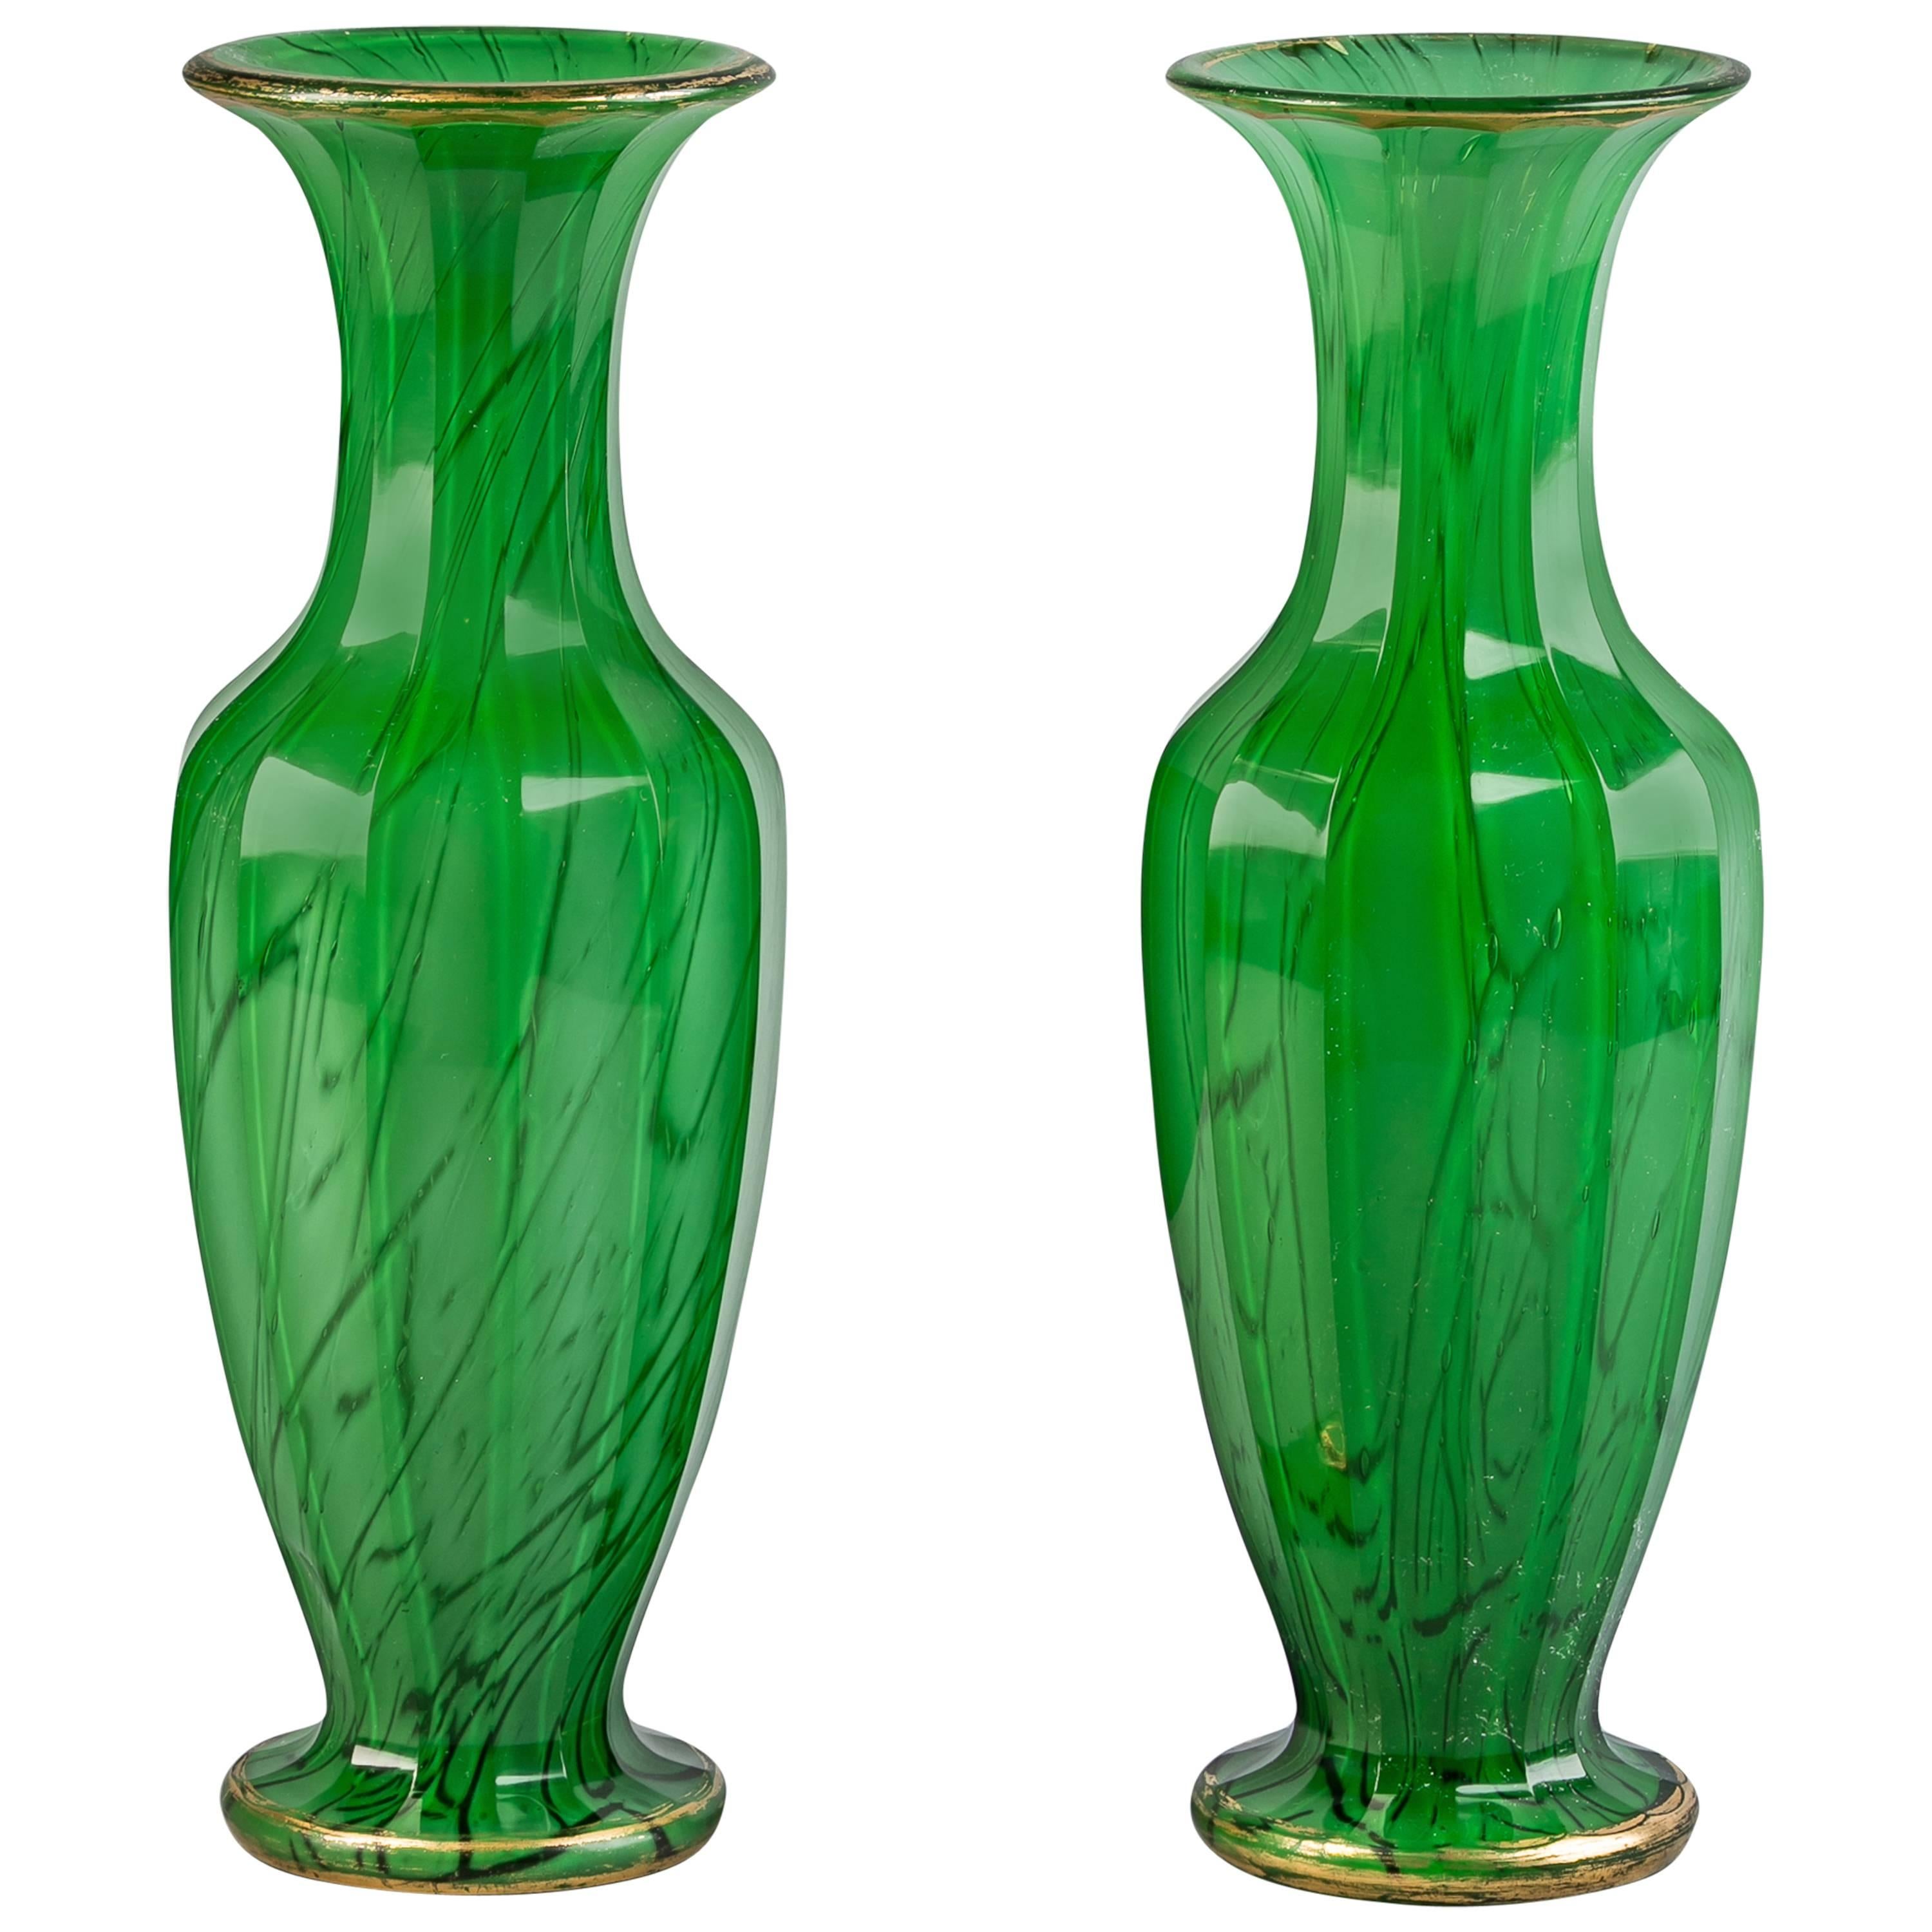 Pair of Bohemian Green and Gilt Glass Vases, circa 1840